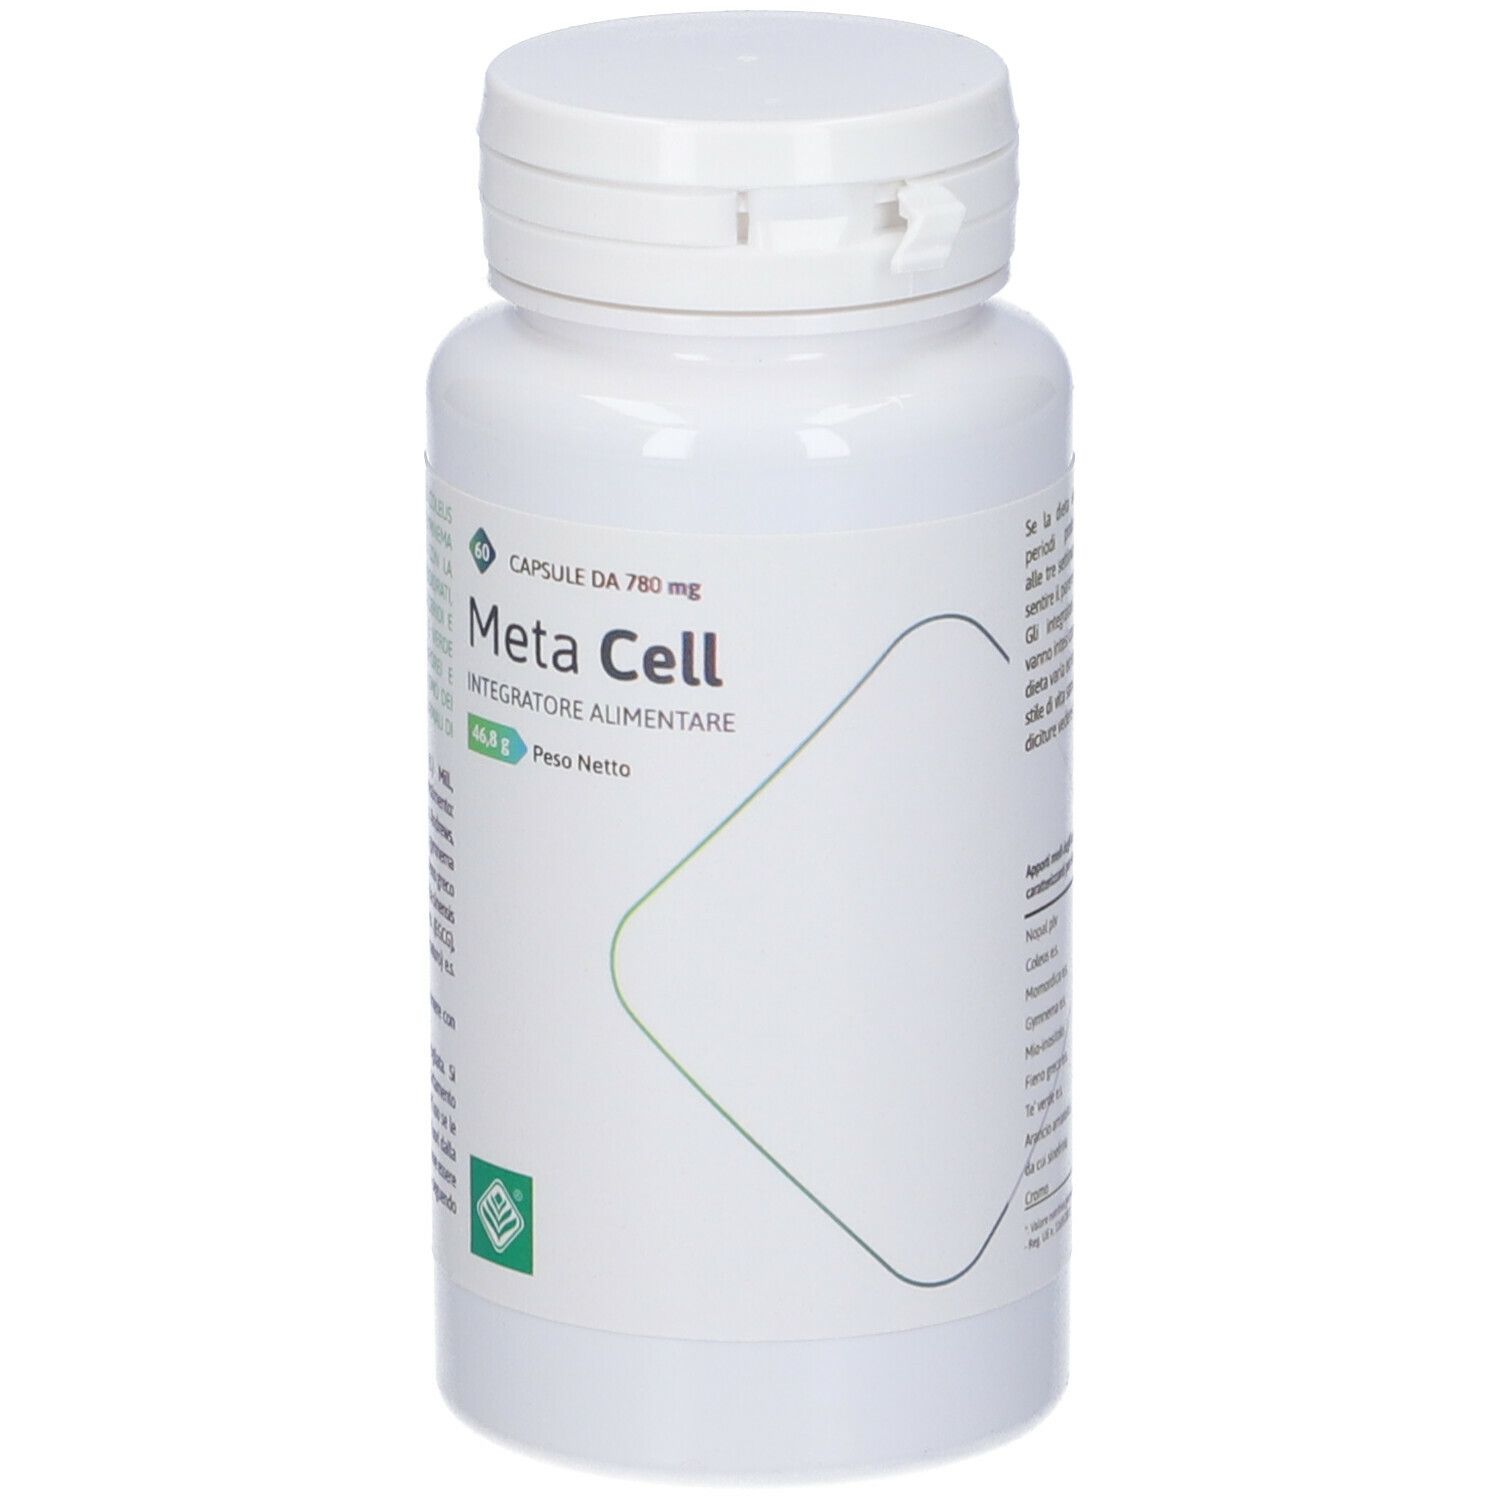 Meta Cell 60Cps